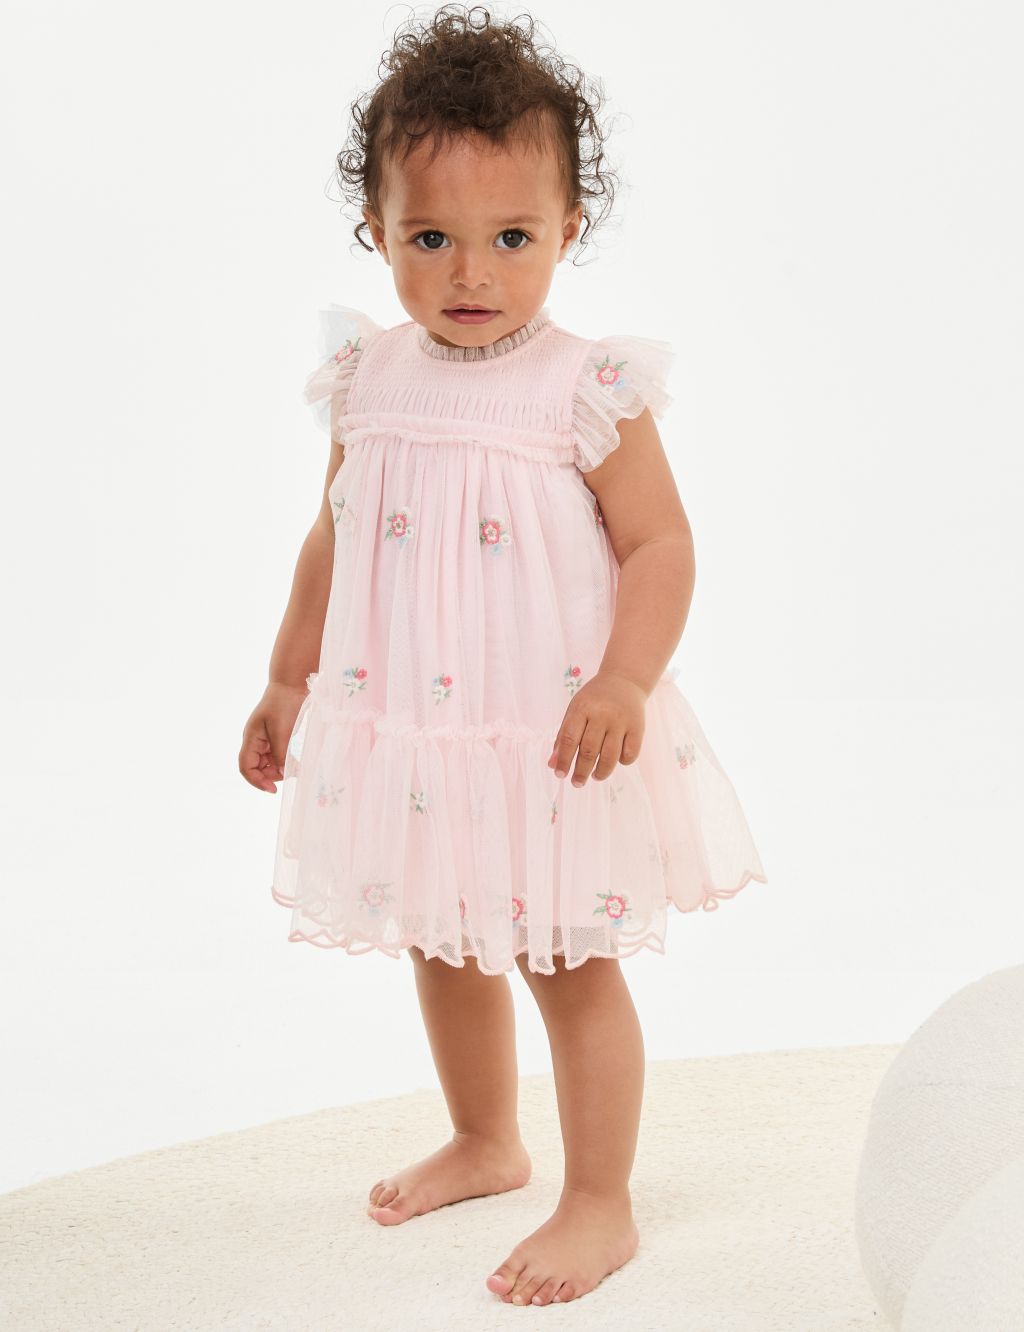 Floral Embroidered Tiered Occasion Dress (0-3 Yrs)